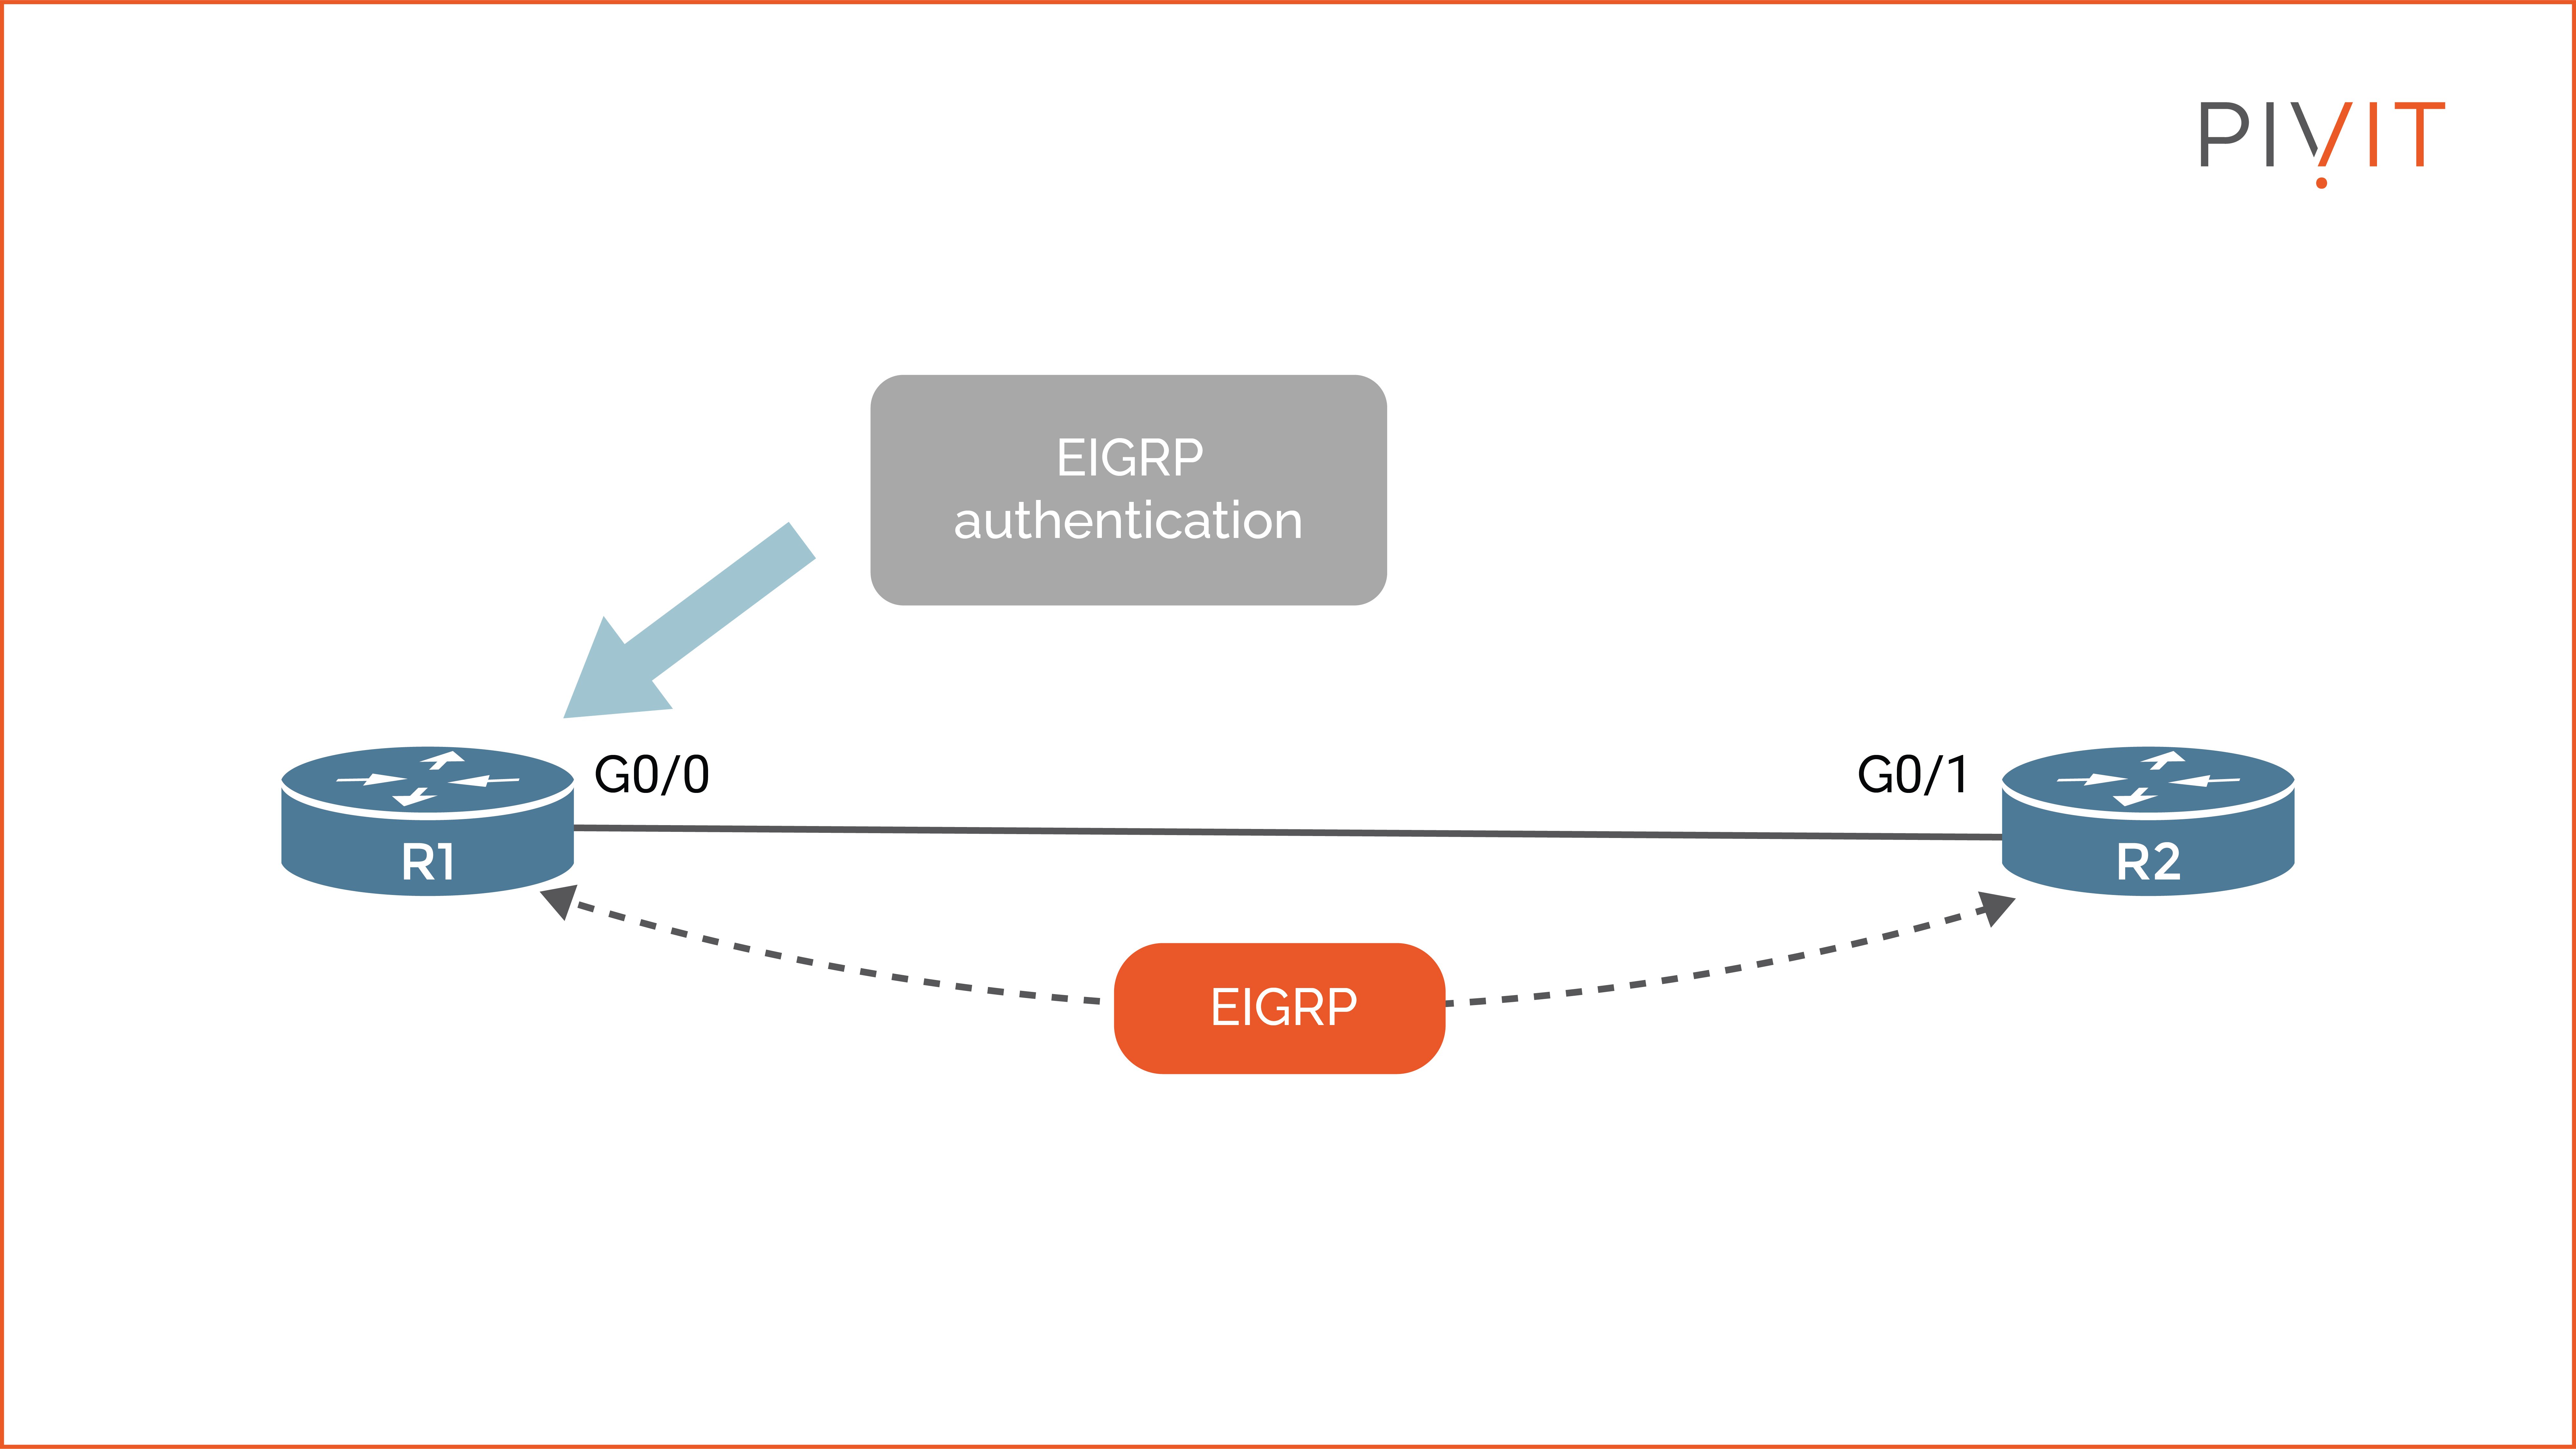 Implementing EIGRP authentication on R1